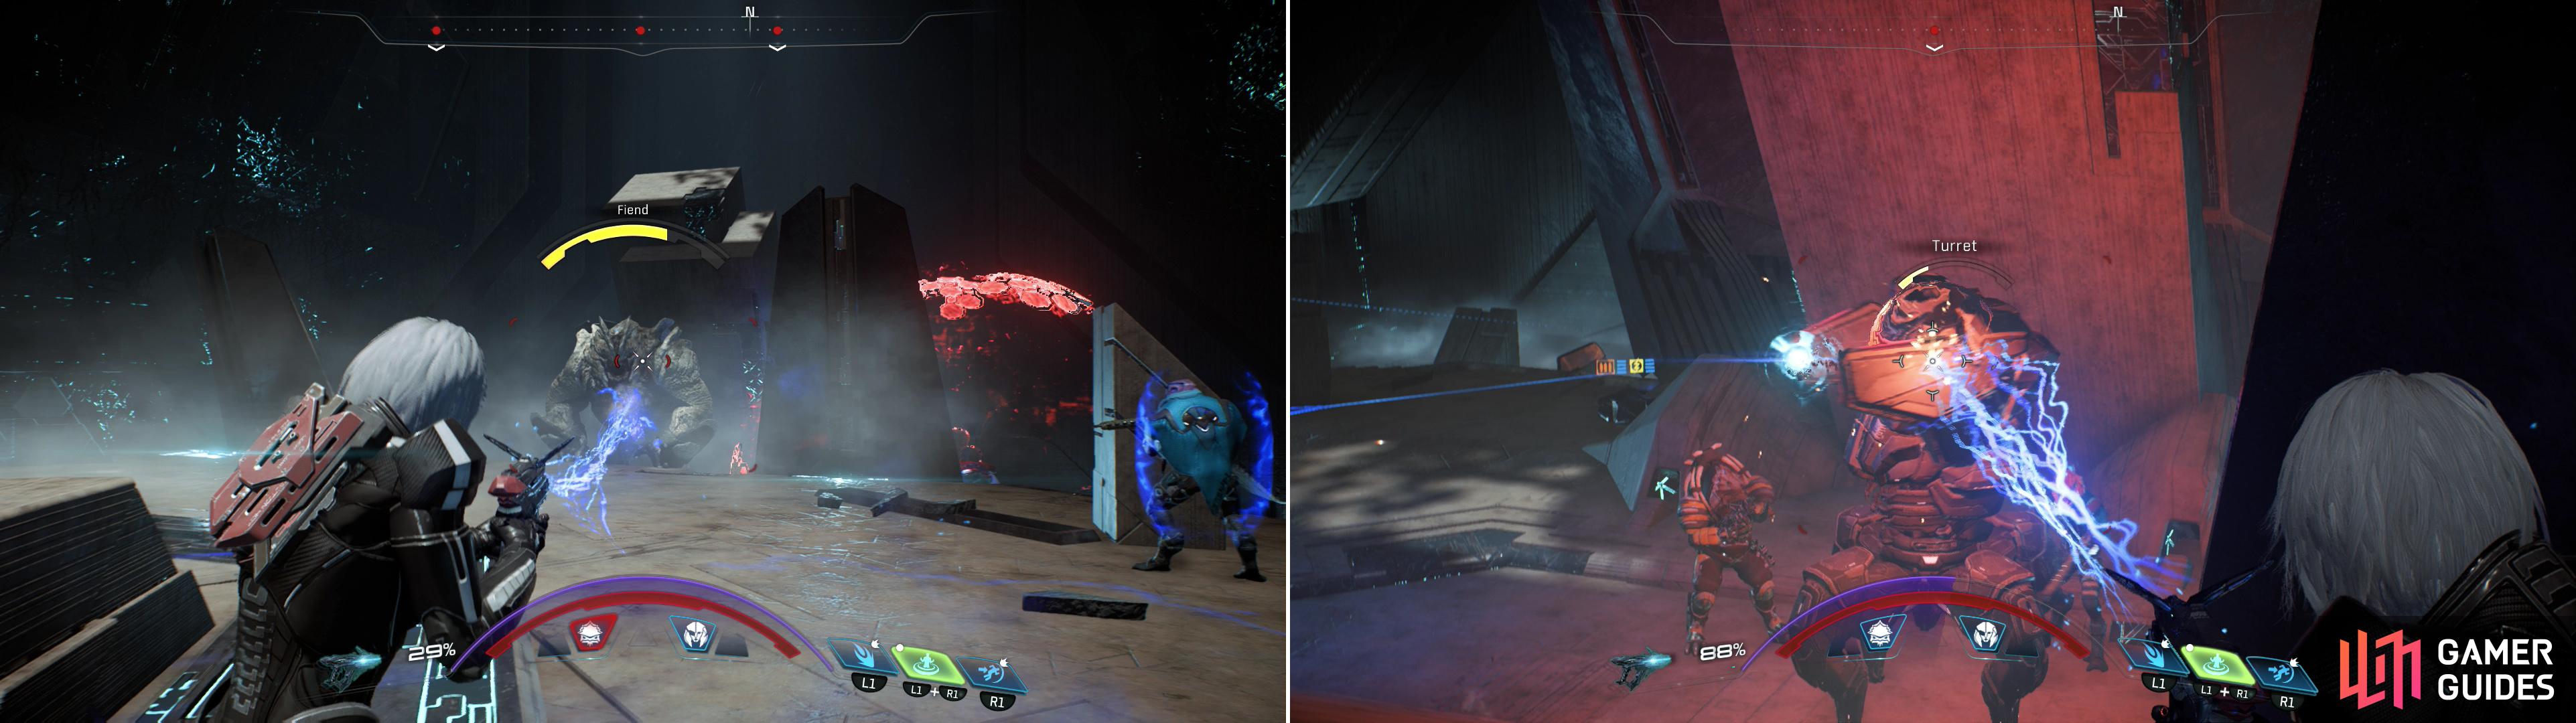 After clearing the lesser Kett out, lure the Fiend away from the Destroyer and to its doom (left). Once isolated, the Destroyer can be relatively easily destroyed (right).